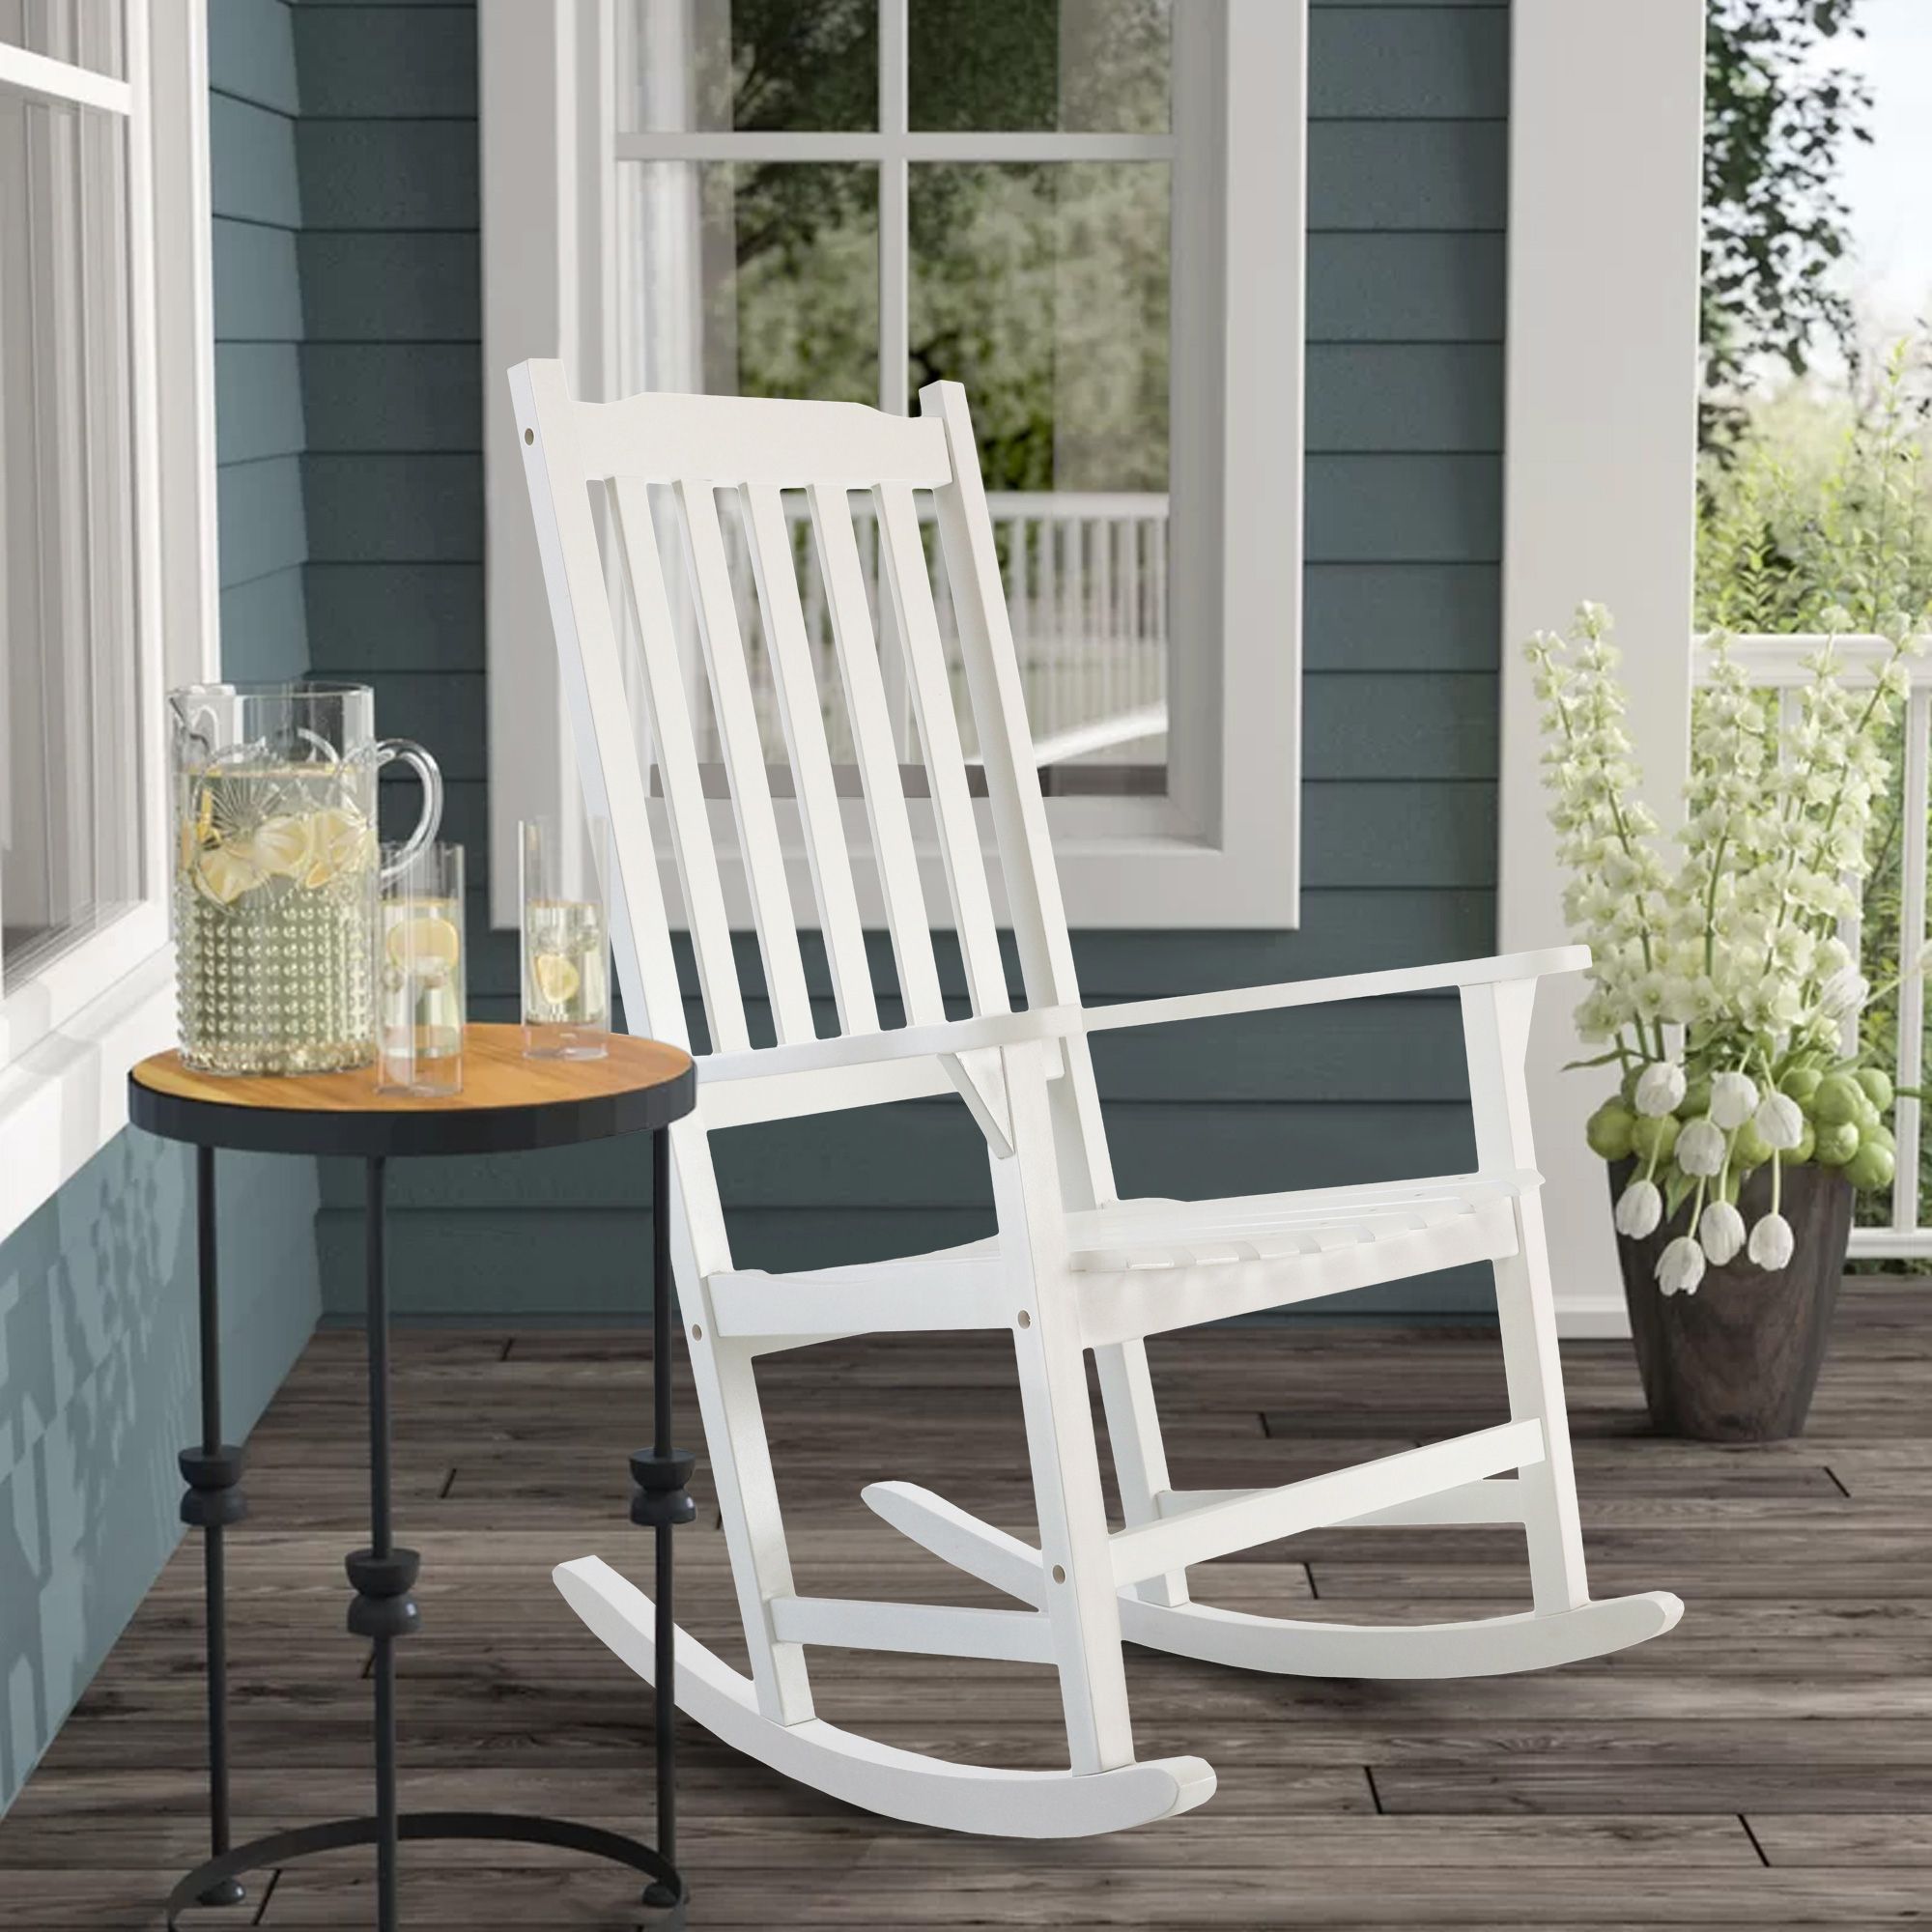 Wooden Rocking Chair, White Rocking Chair Patio Furniture, Outdoor Pertaining To White Wood Soutdoor Seating Sets (View 6 of 15)